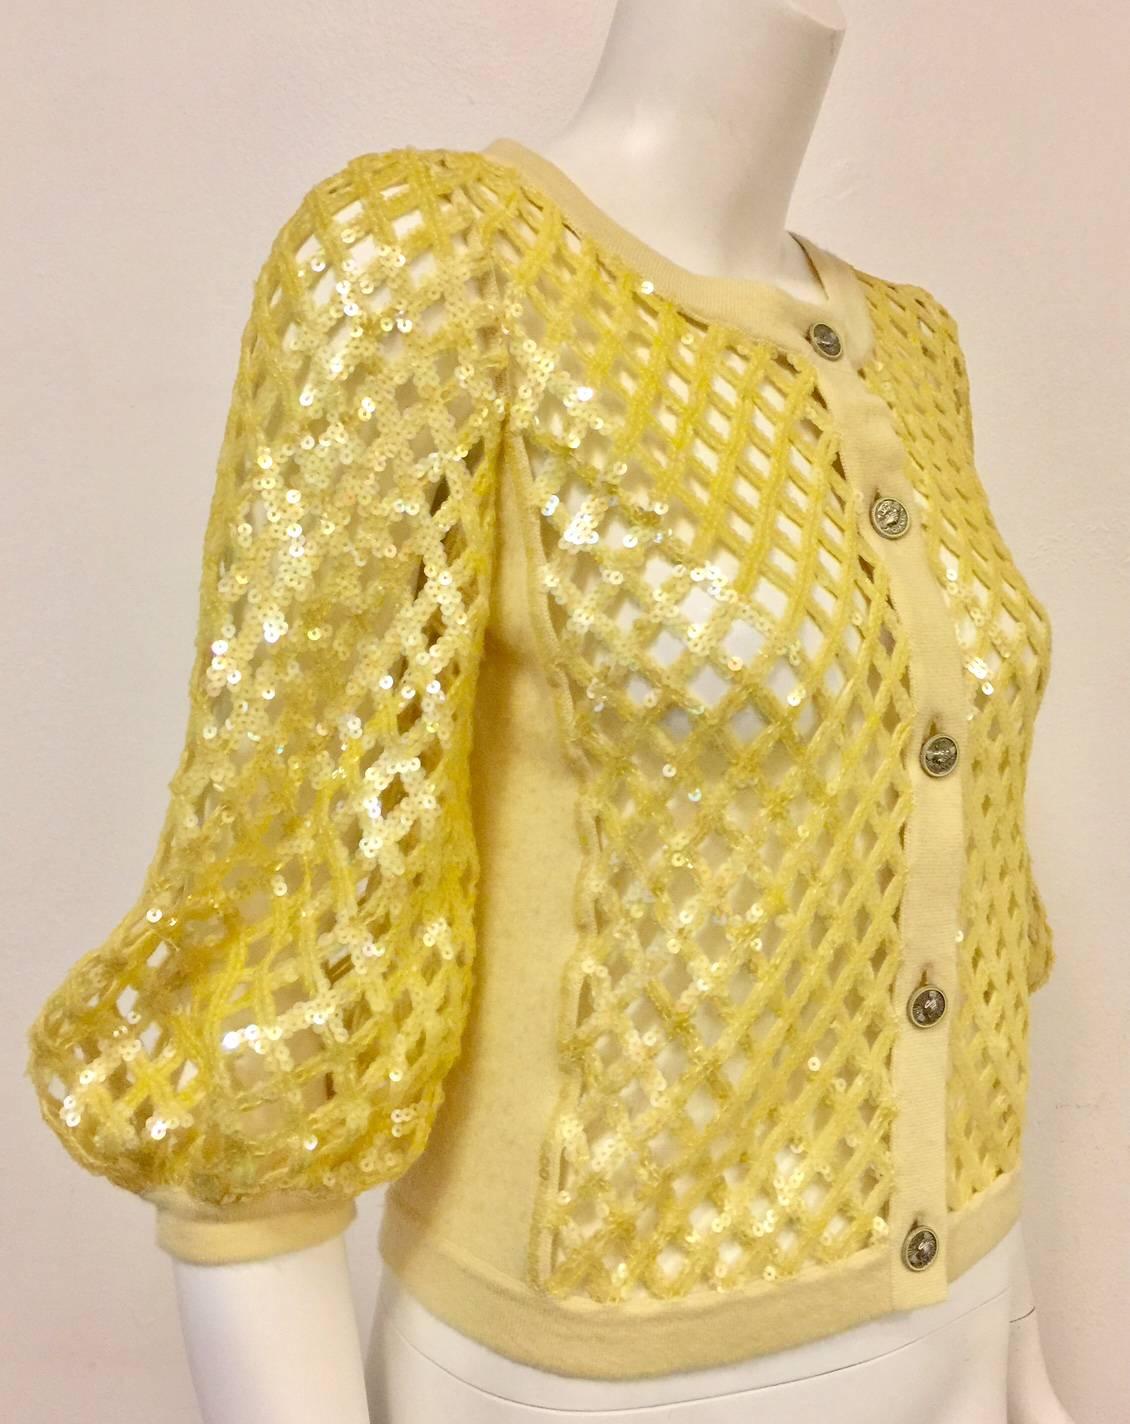 2008 Chanel Lemon Open Lattice Woven Cardigan goes from Spring Holiday to Cruise to Spring effortlessly.  Features ultra-luxurious cashmere, iridescent sequins allover, and pouf bracelet length sleeves with banded hem.  5-button closure.  Look